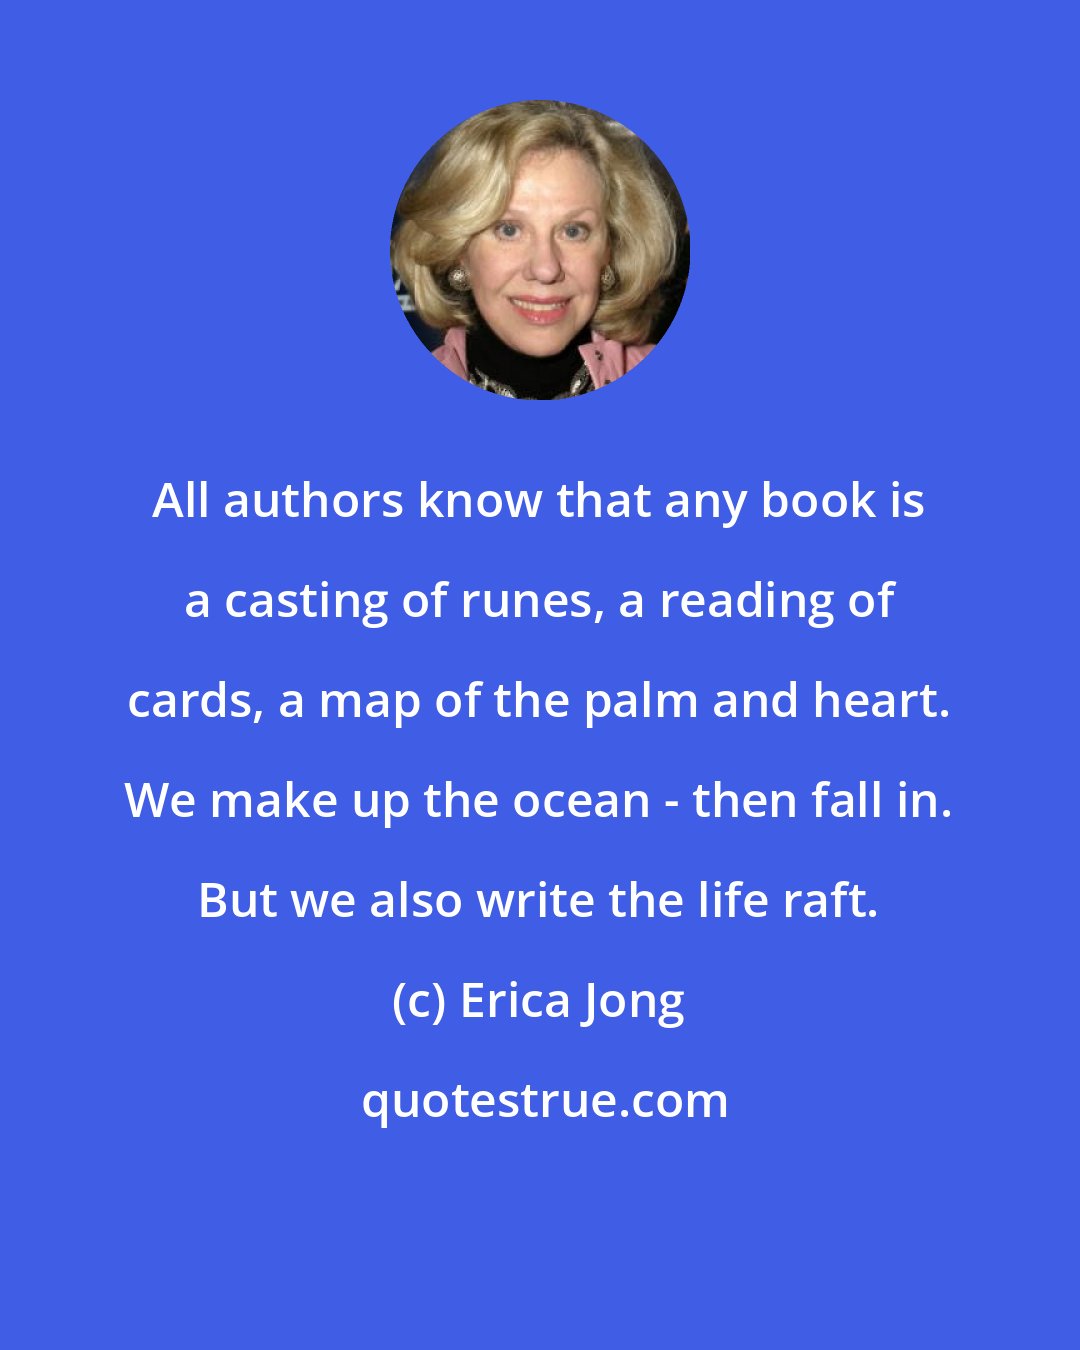 Erica Jong: All authors know that any book is a casting of runes, a reading of cards, a map of the palm and heart. We make up the ocean - then fall in. But we also write the life raft.